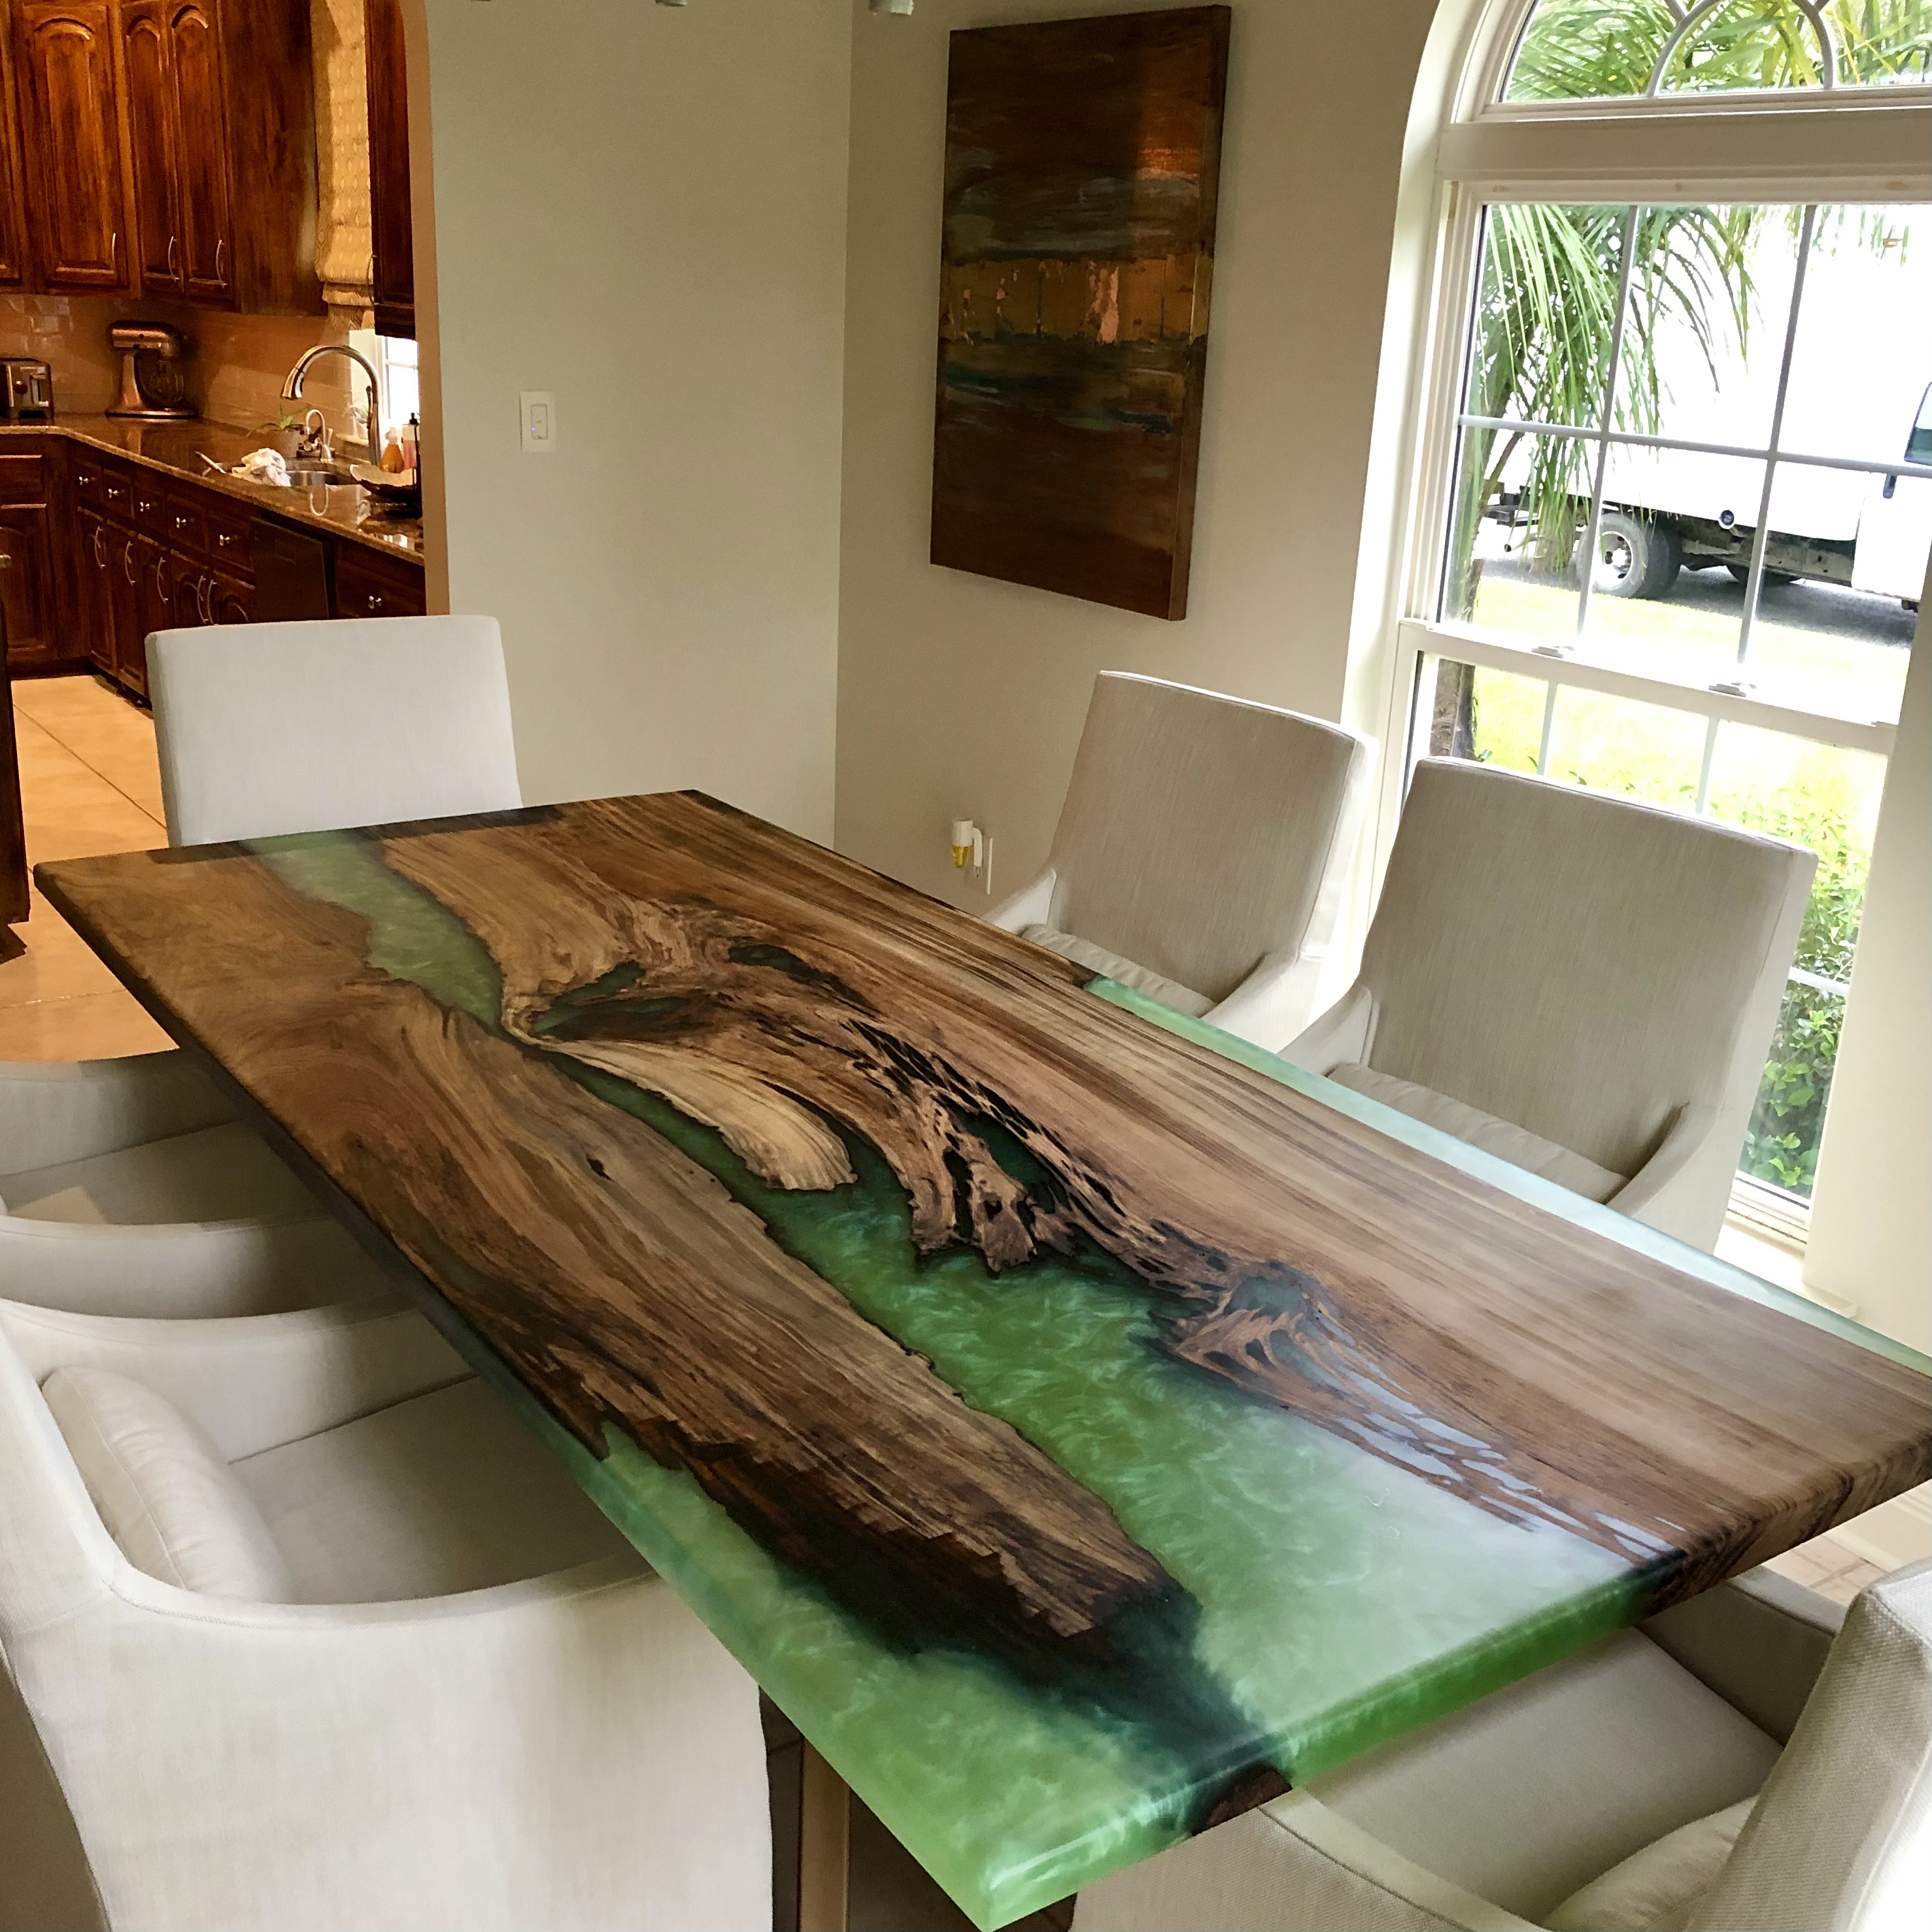 Designing Your Perfect Epoxy Furniture with The Olde Mill: A Step-by-Step Guide